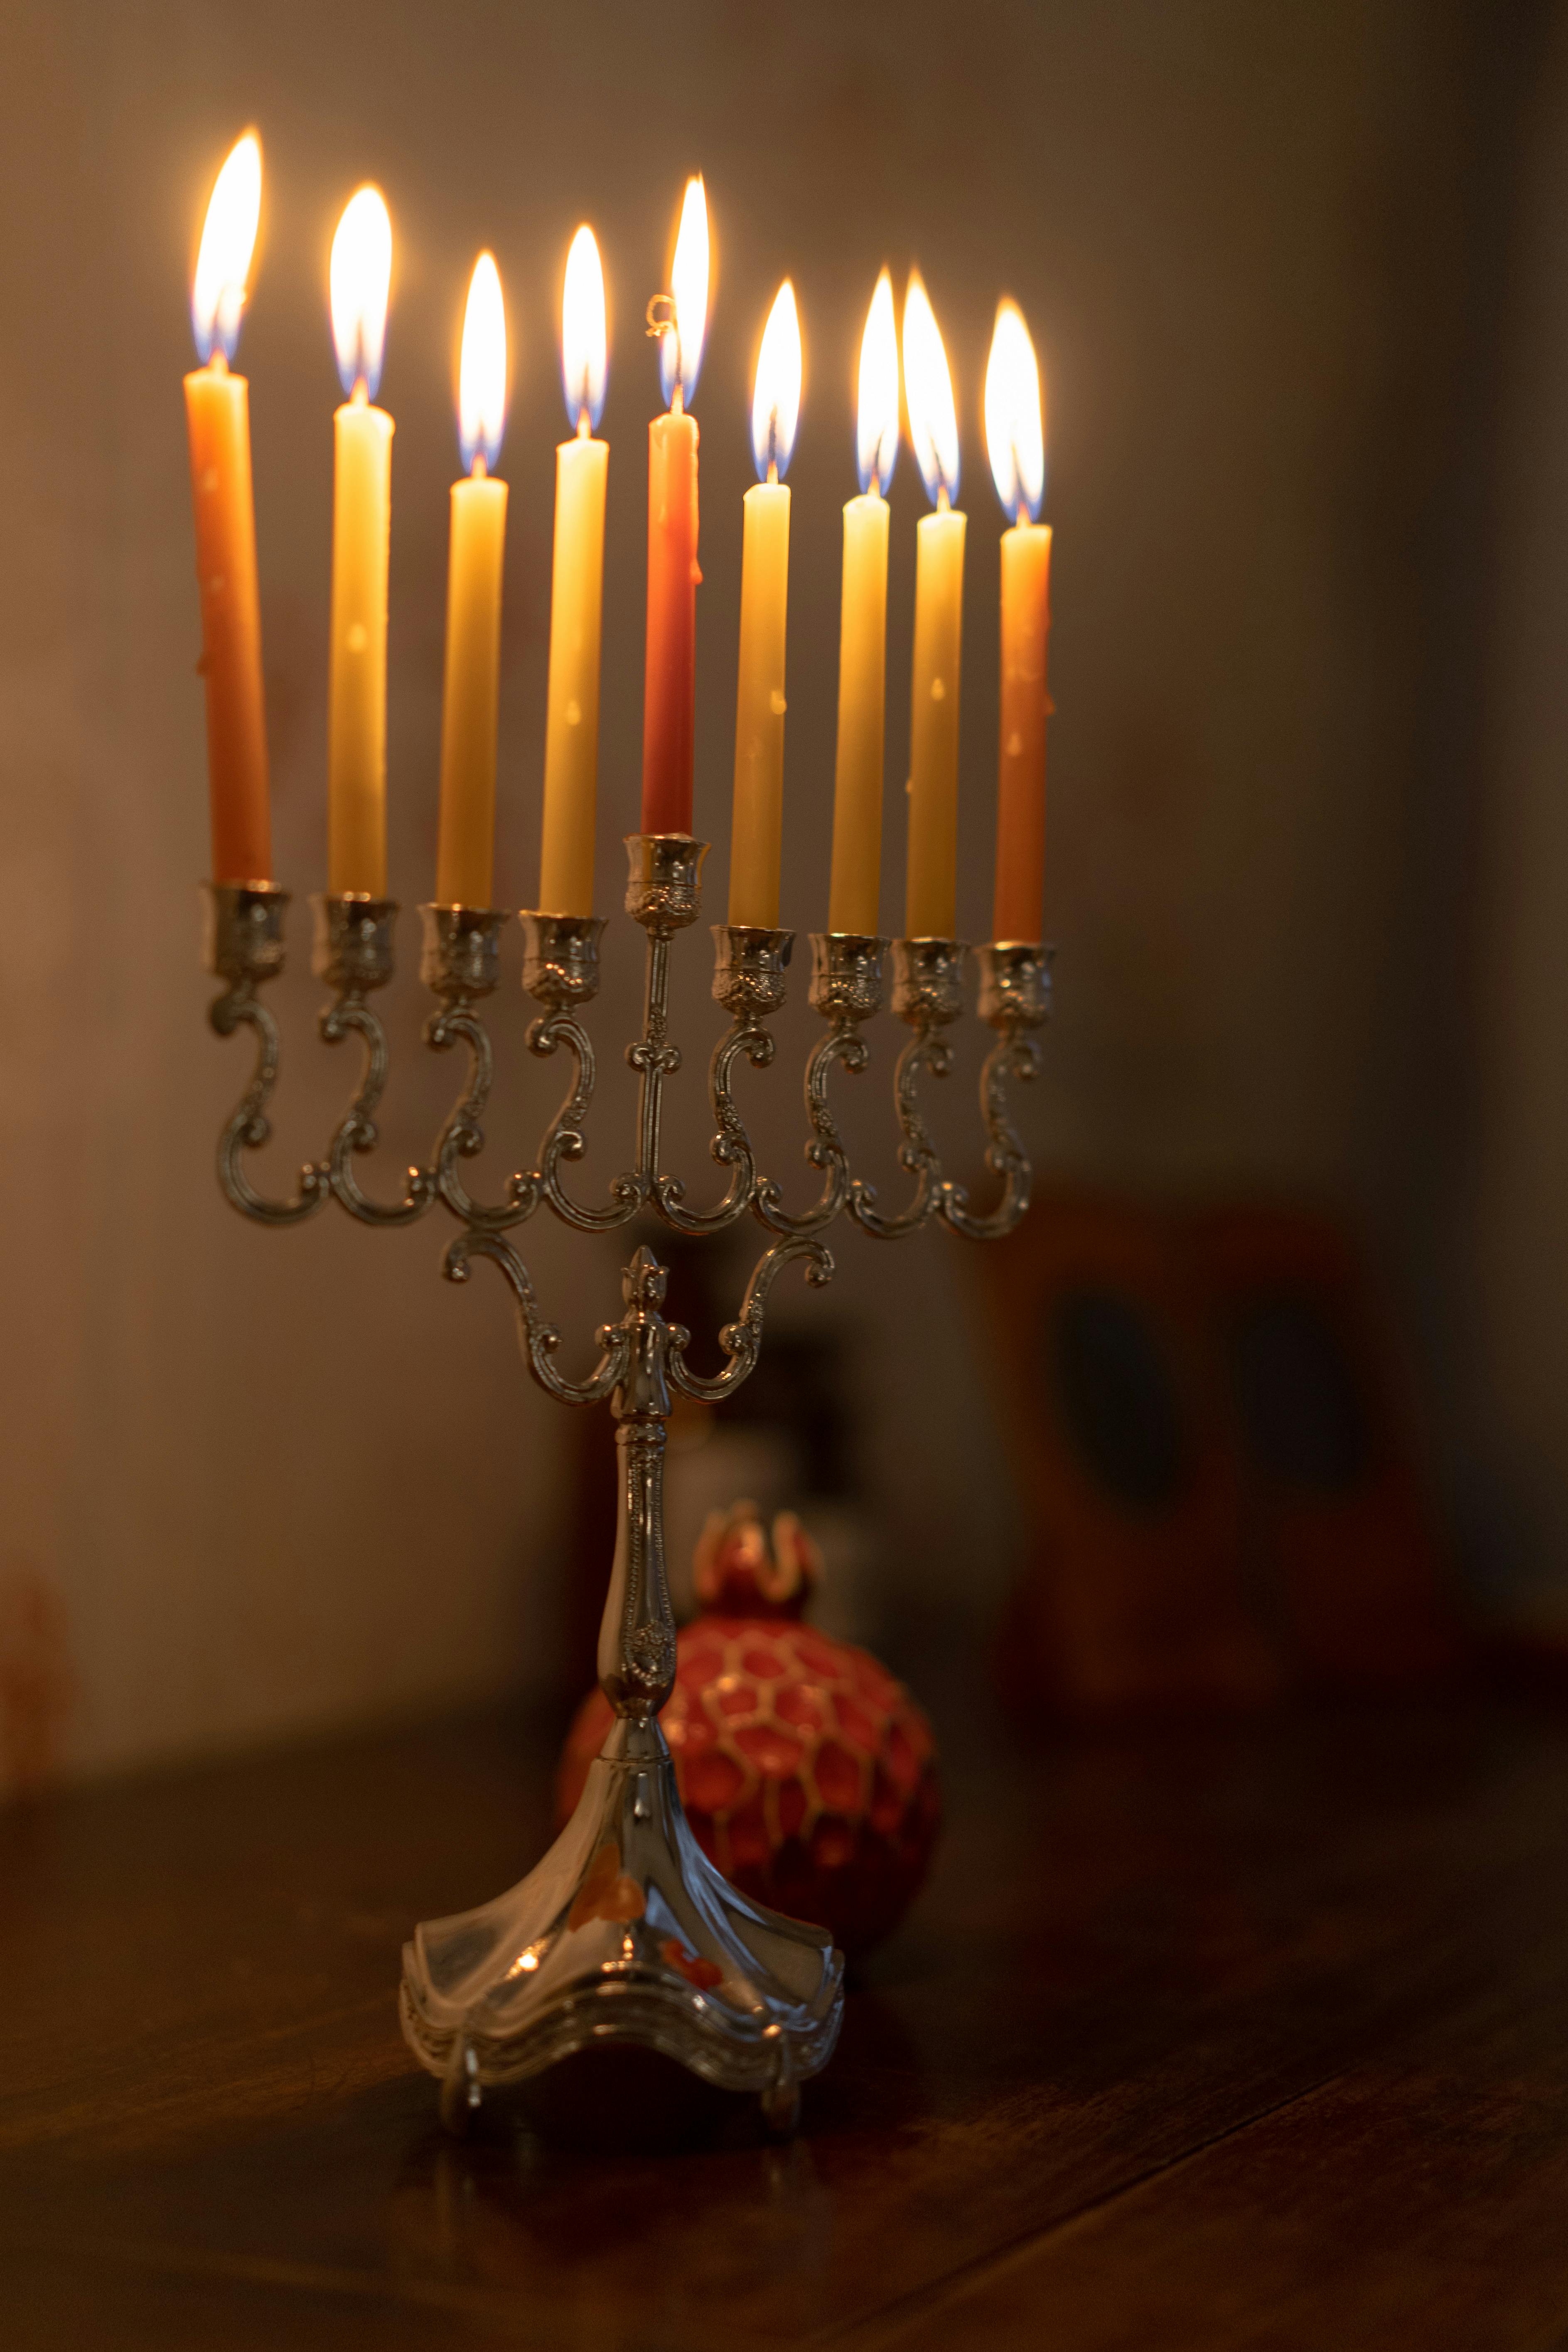 Current Events and Chanukah- A Message of Contradictions